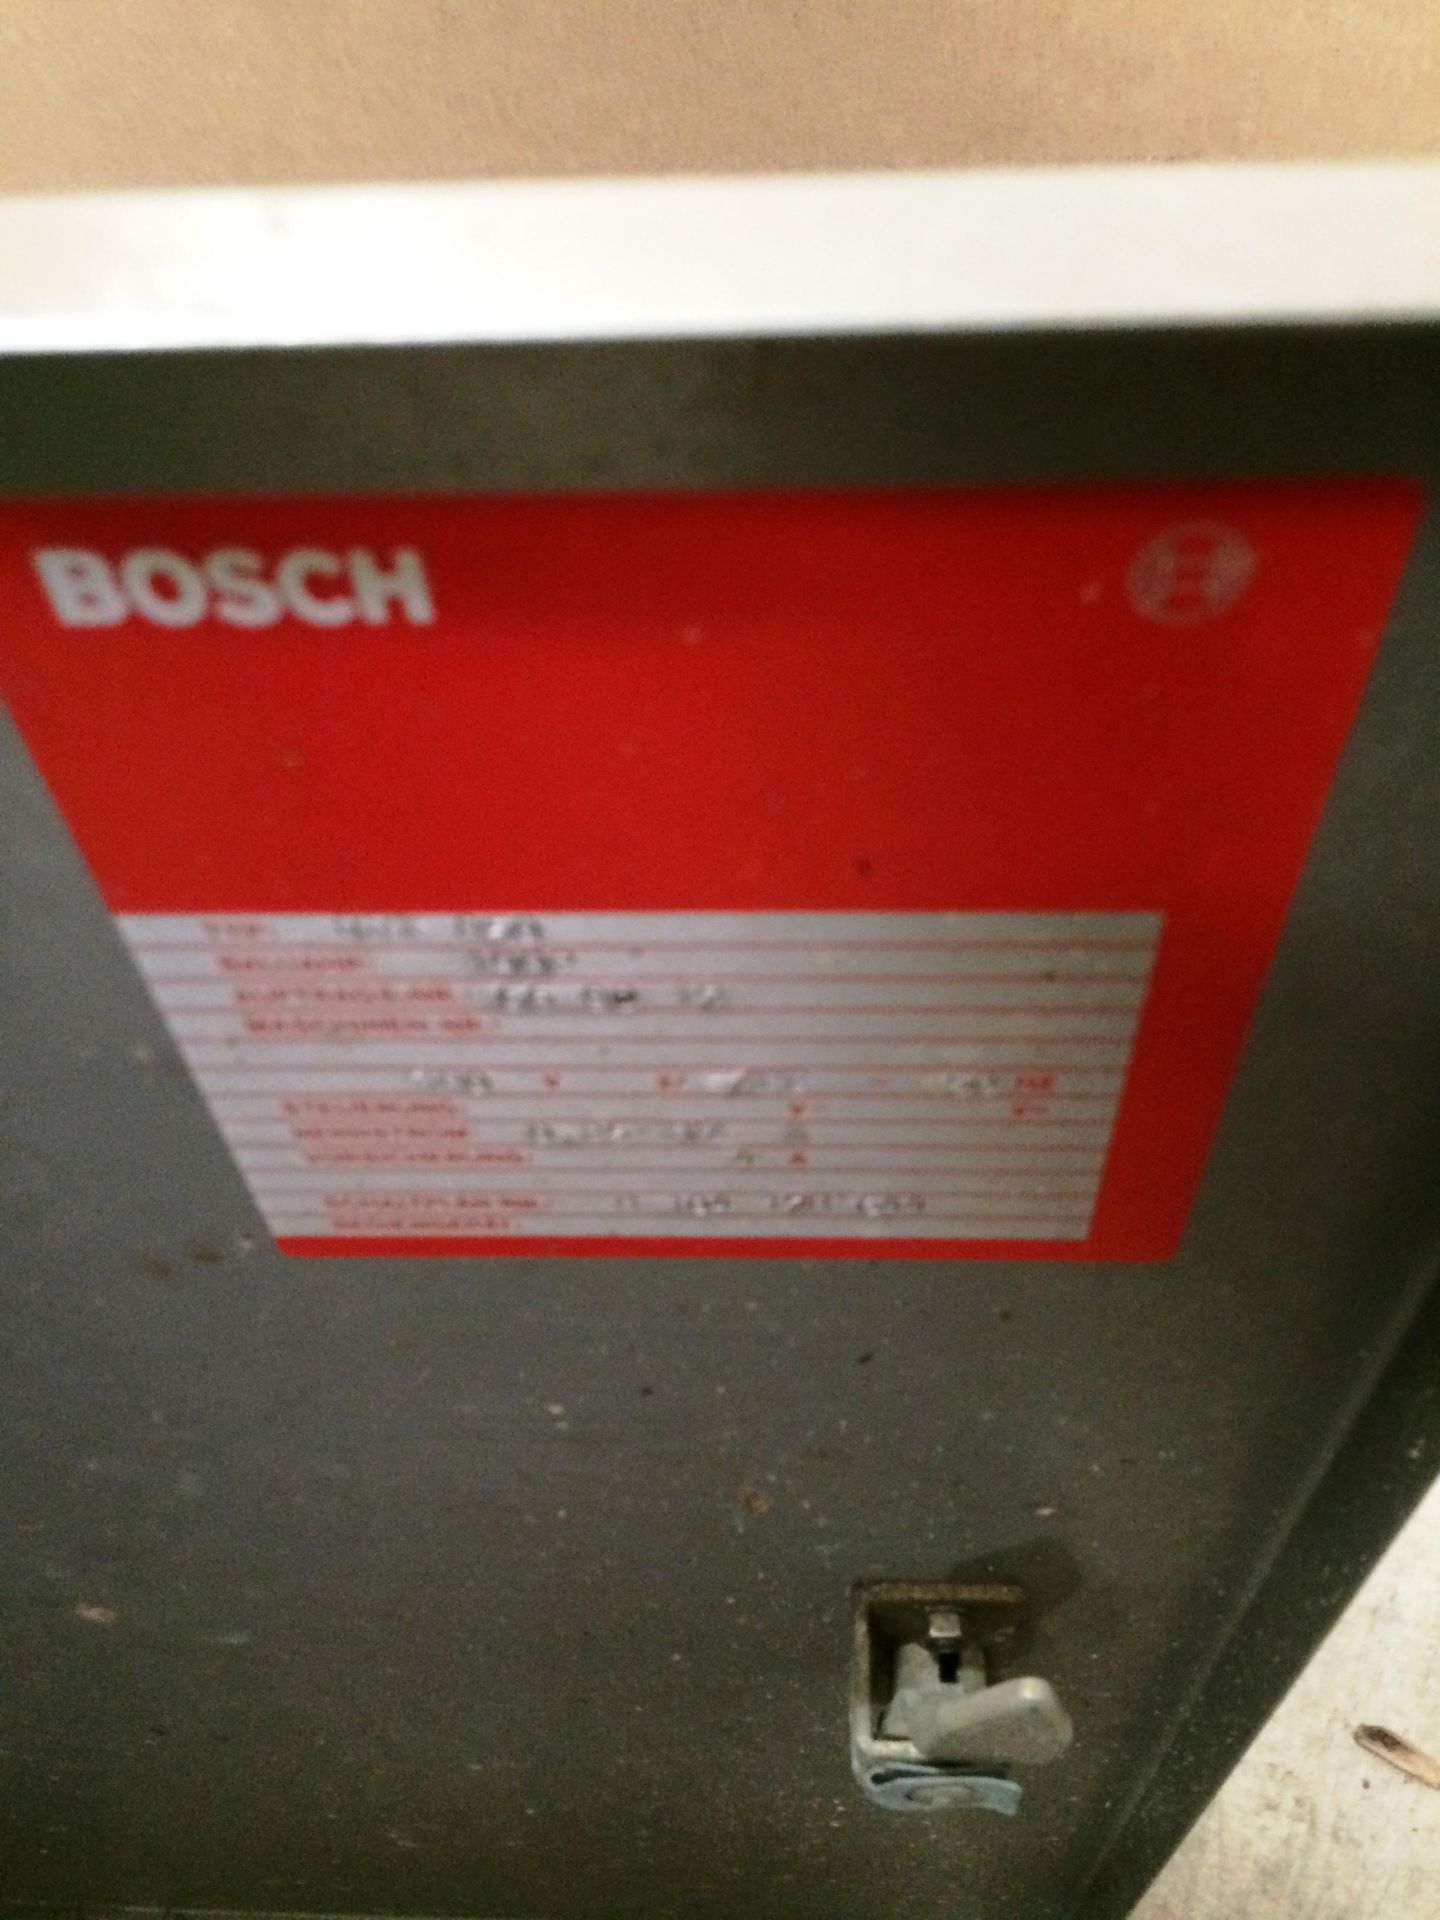 A Bosch URK0850 stainless steel cased agitator with revolving circular top, 3 phase, - Image 2 of 2